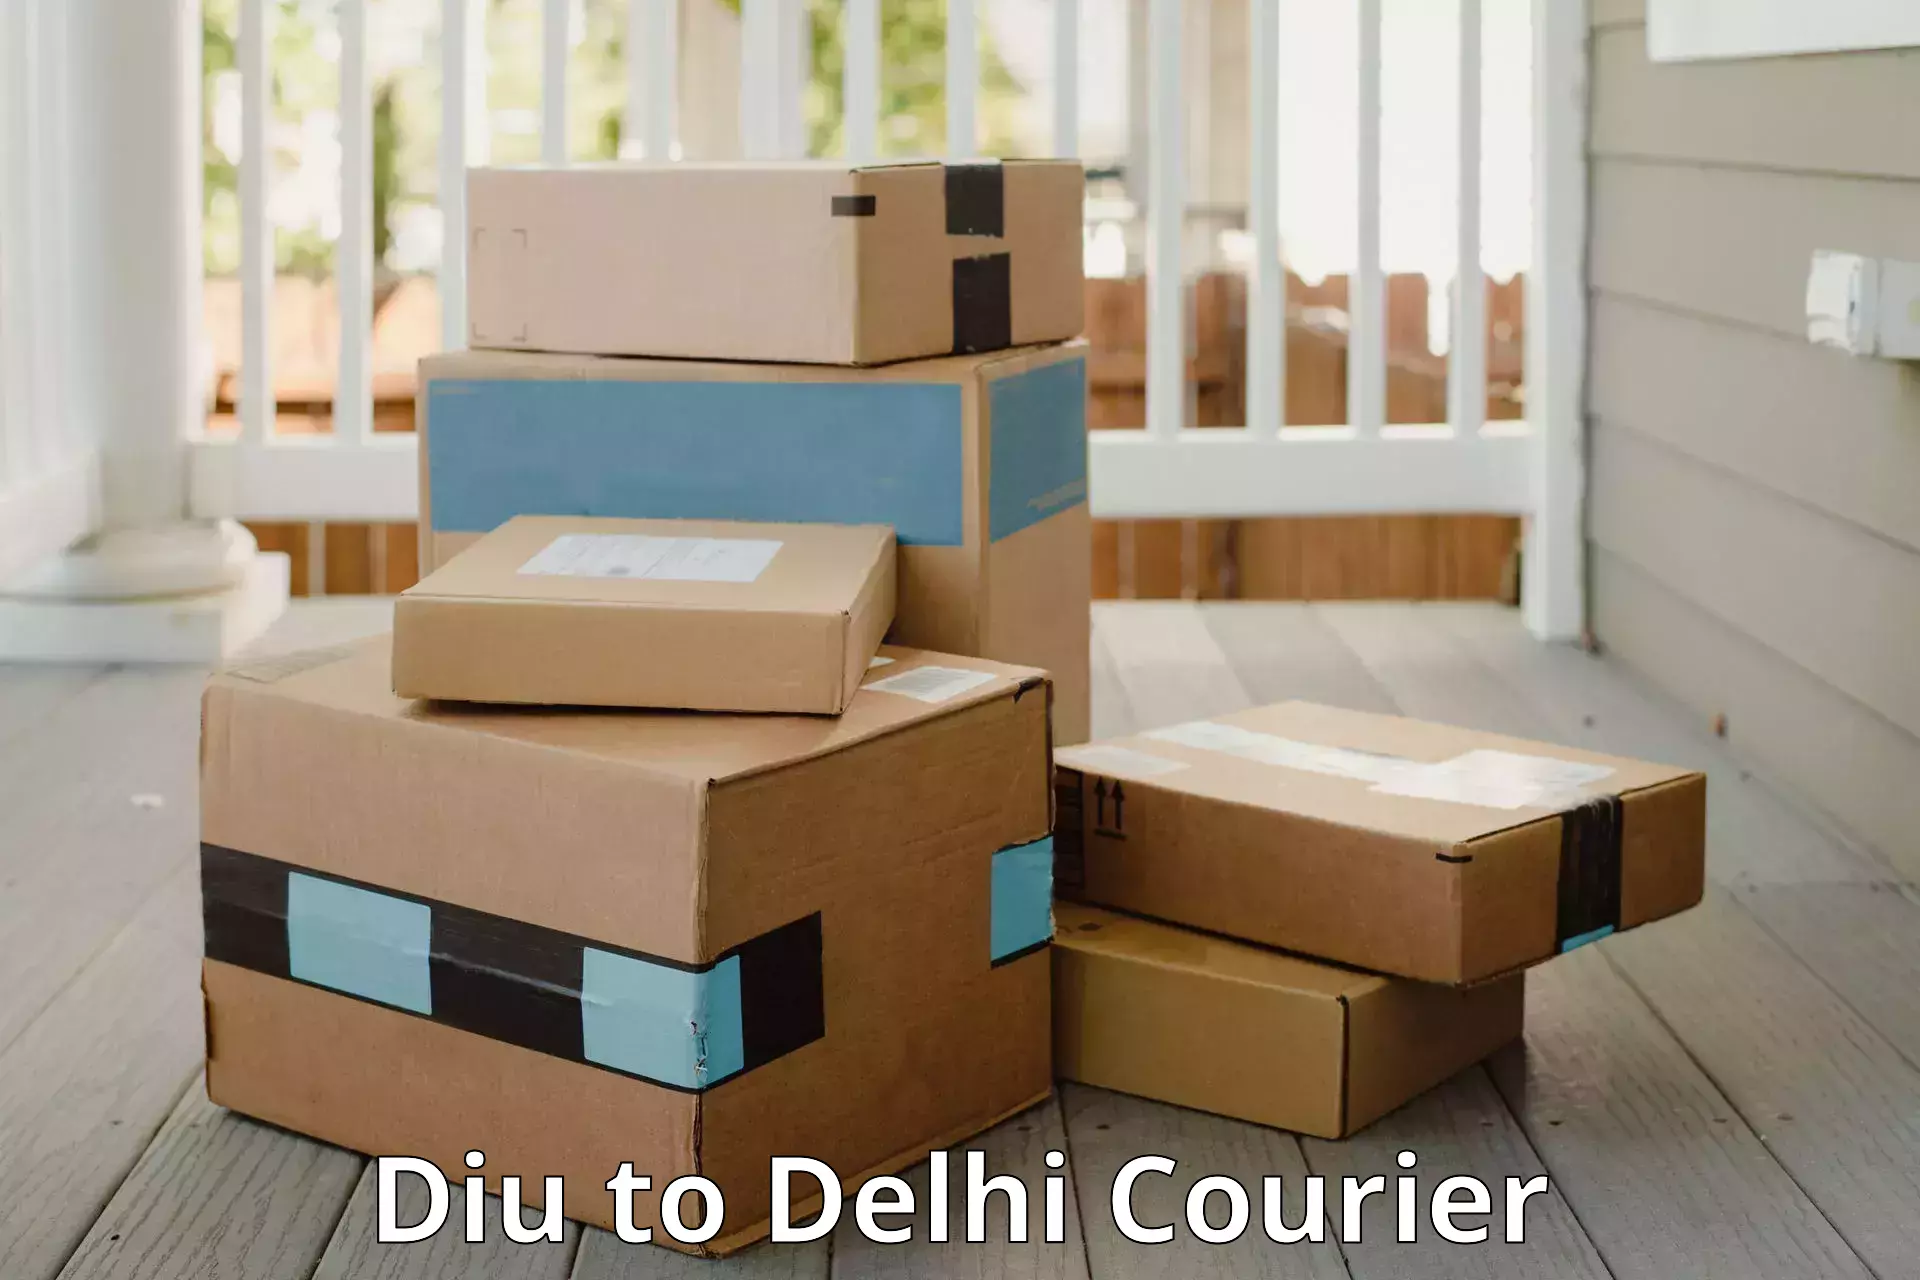 Urgent luggage shipment in Diu to NCR